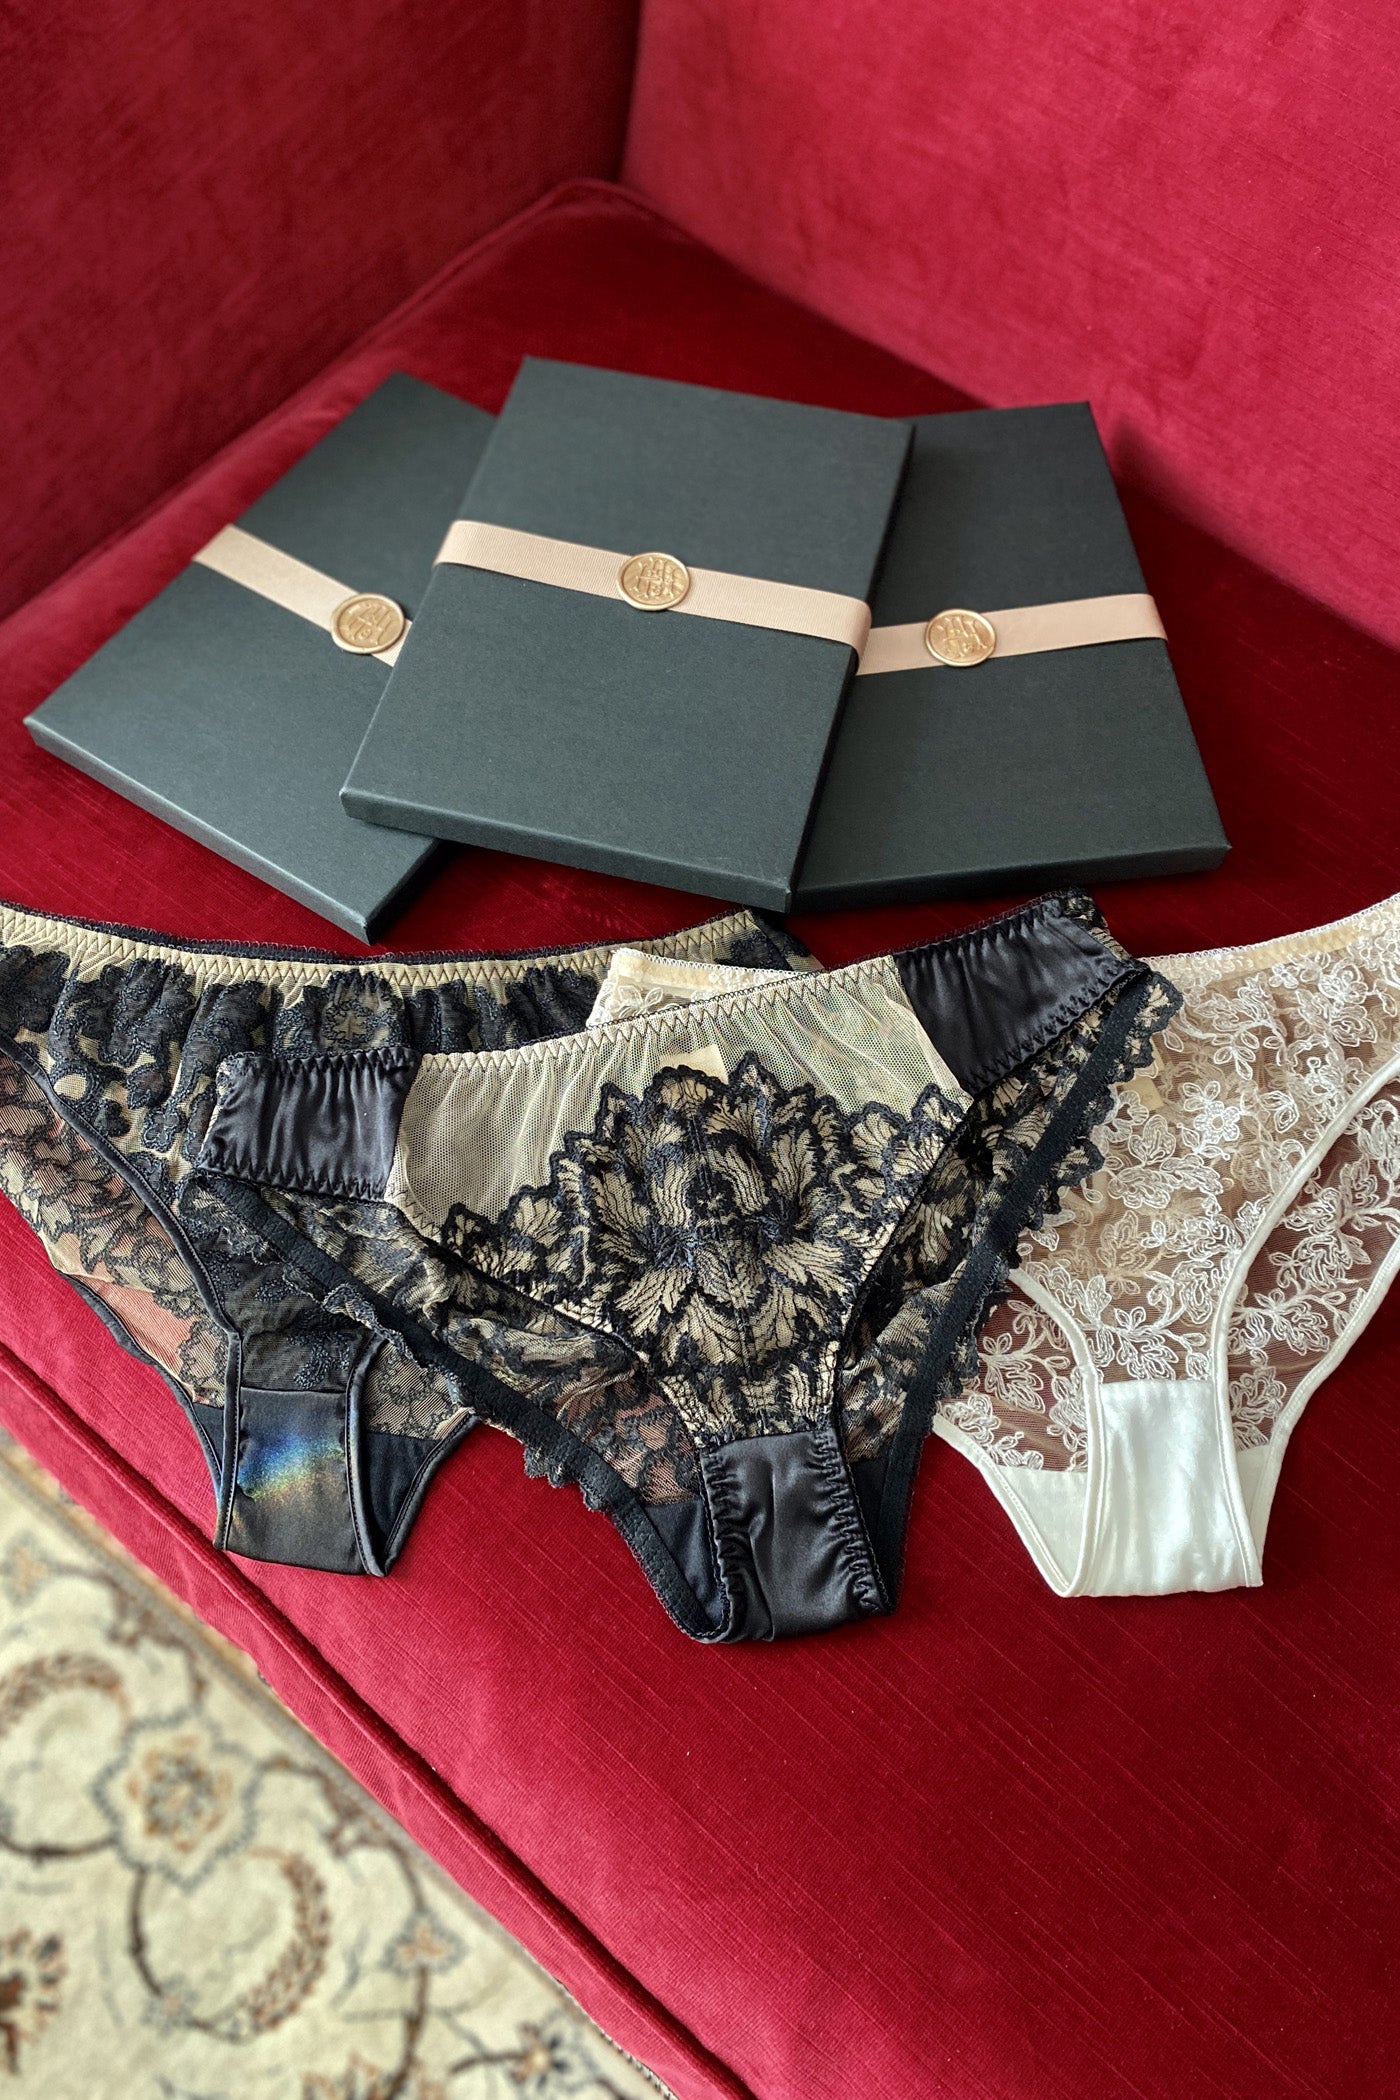 Luxury knicker gift set with 3 black, gold and ivory sheer lace briefs and gift boxes